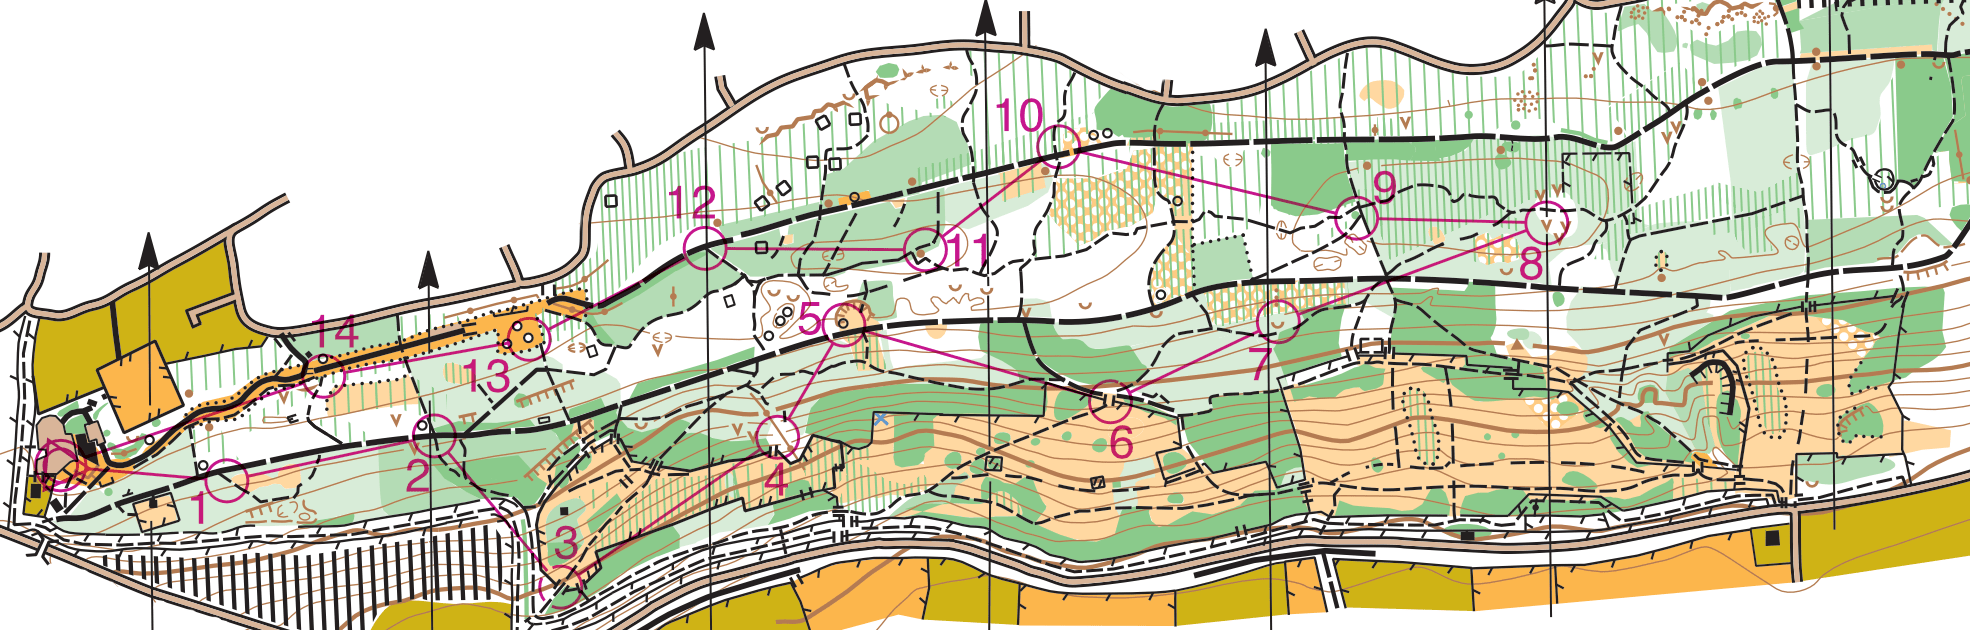 Example of a Course map